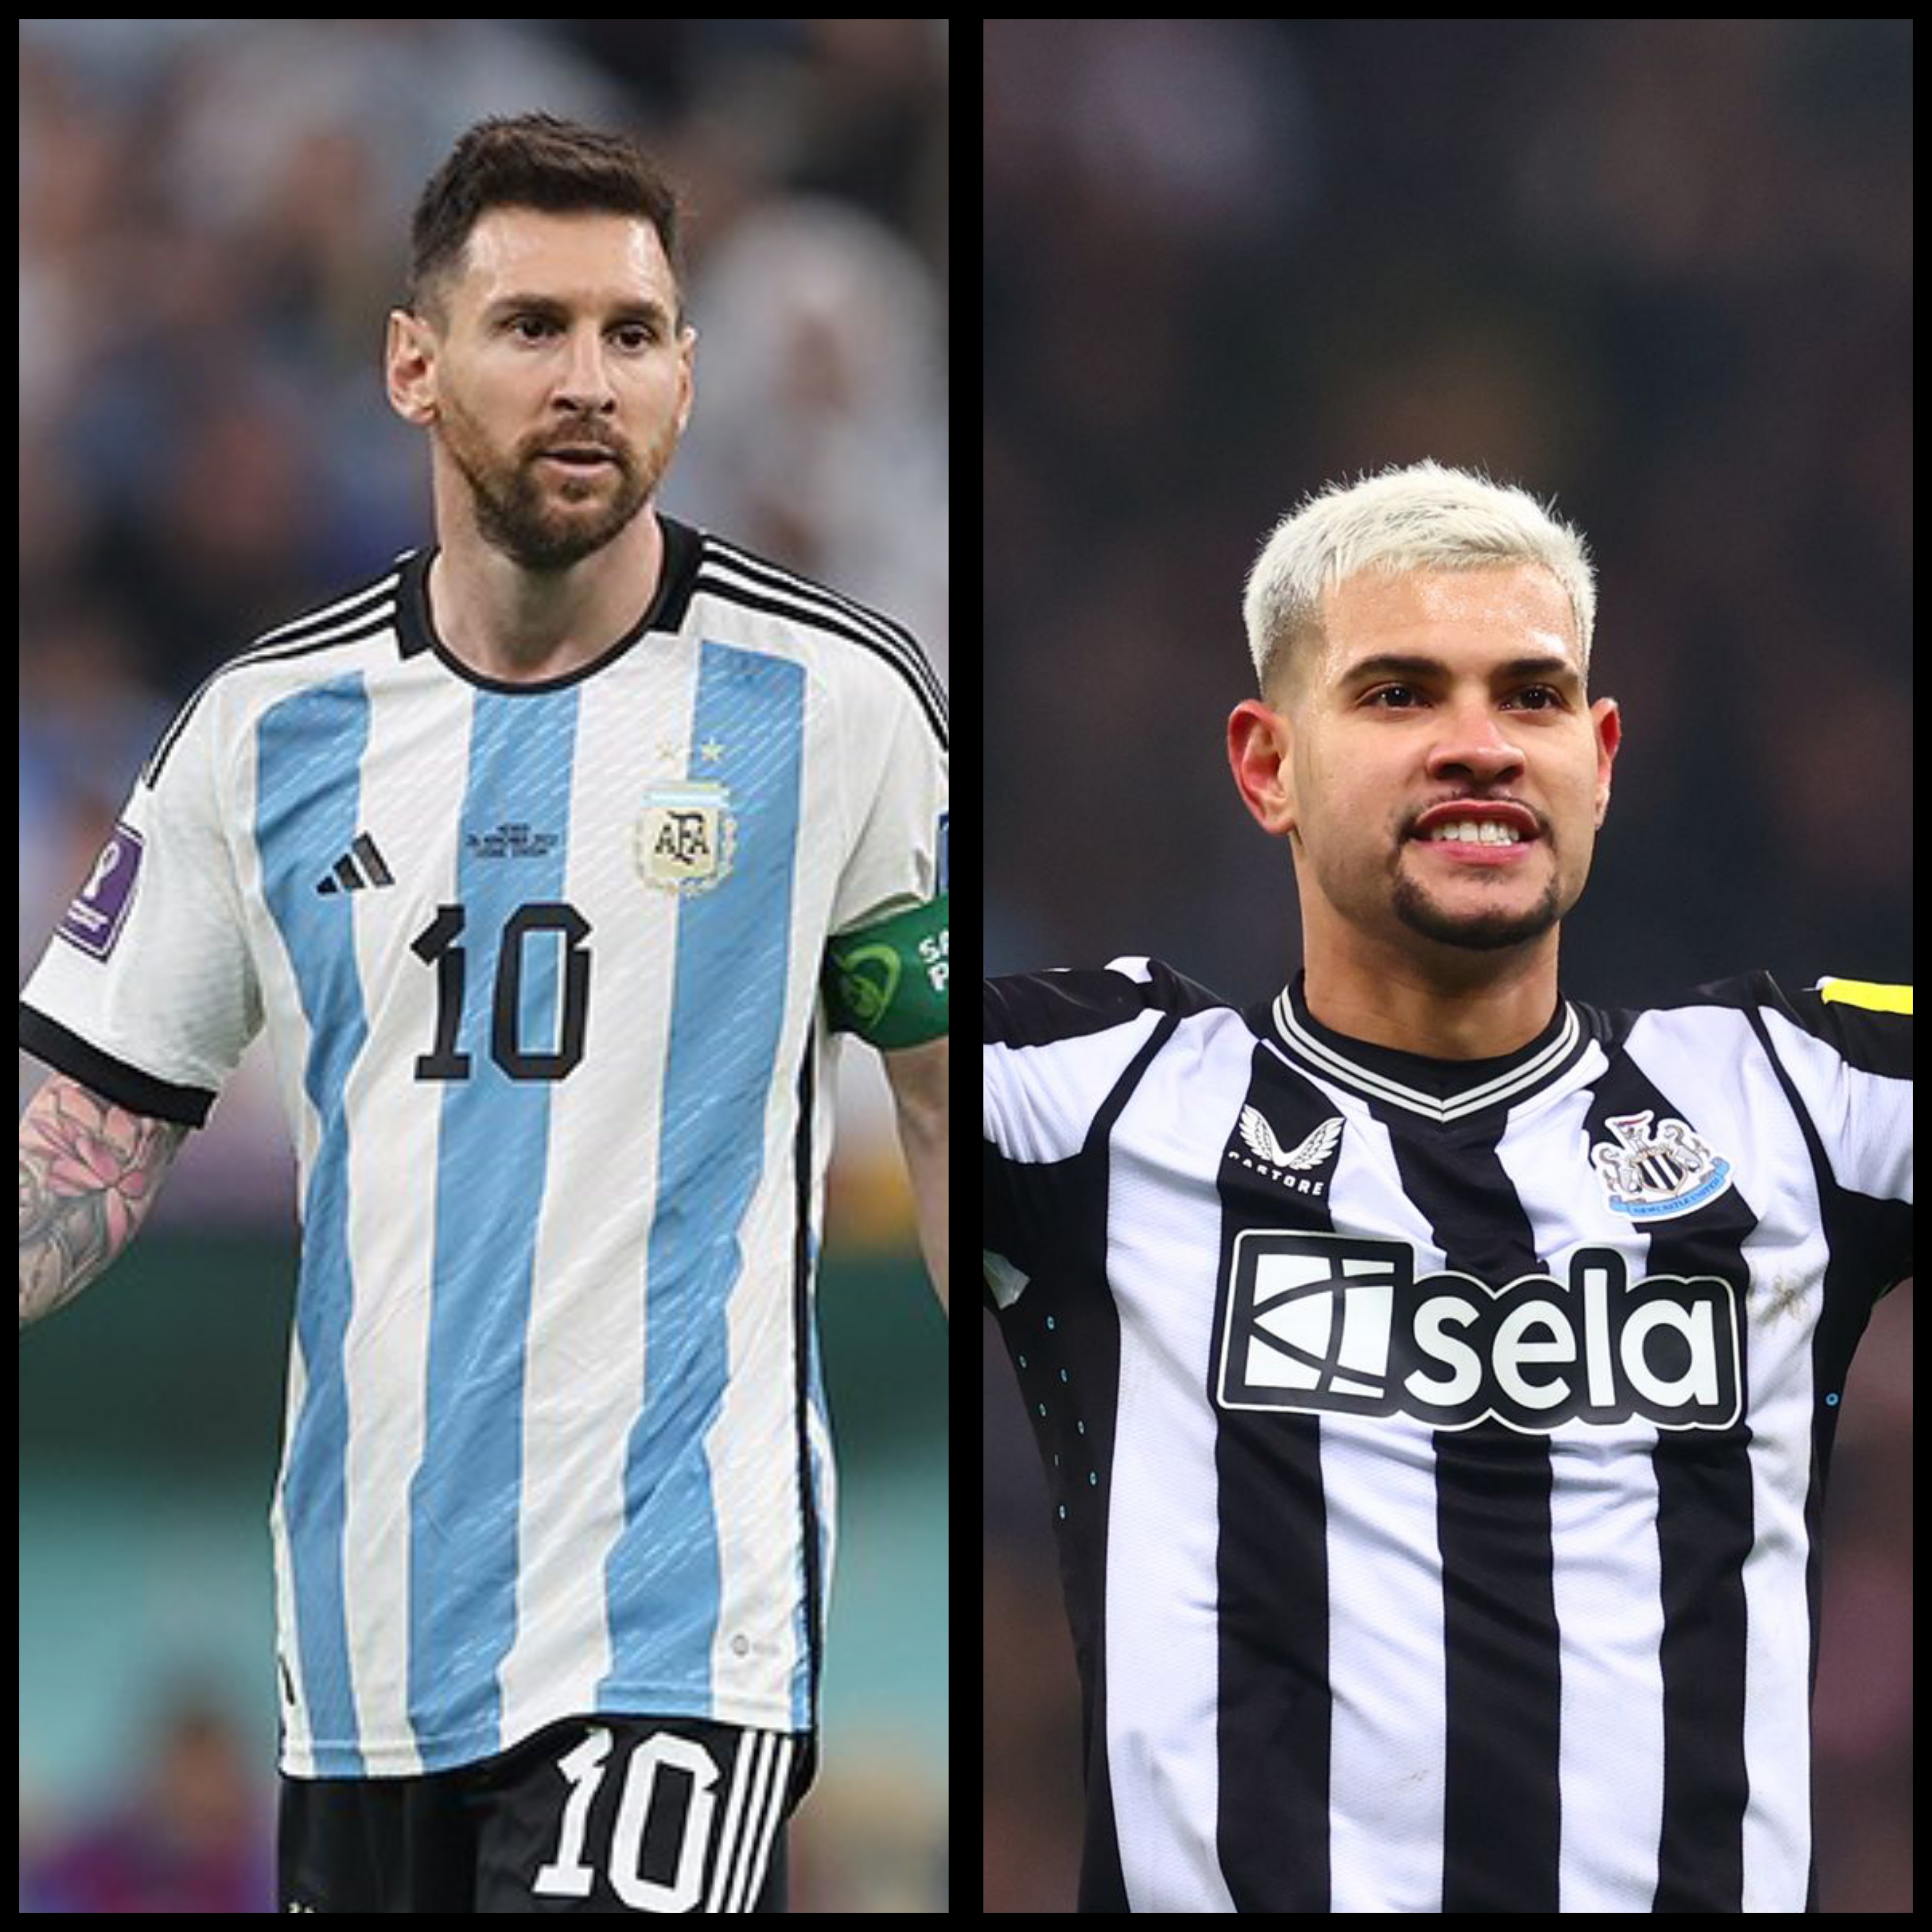 Messi could play 2026 World Cup and Bruno Guimaraes wants to stay at Newcastle